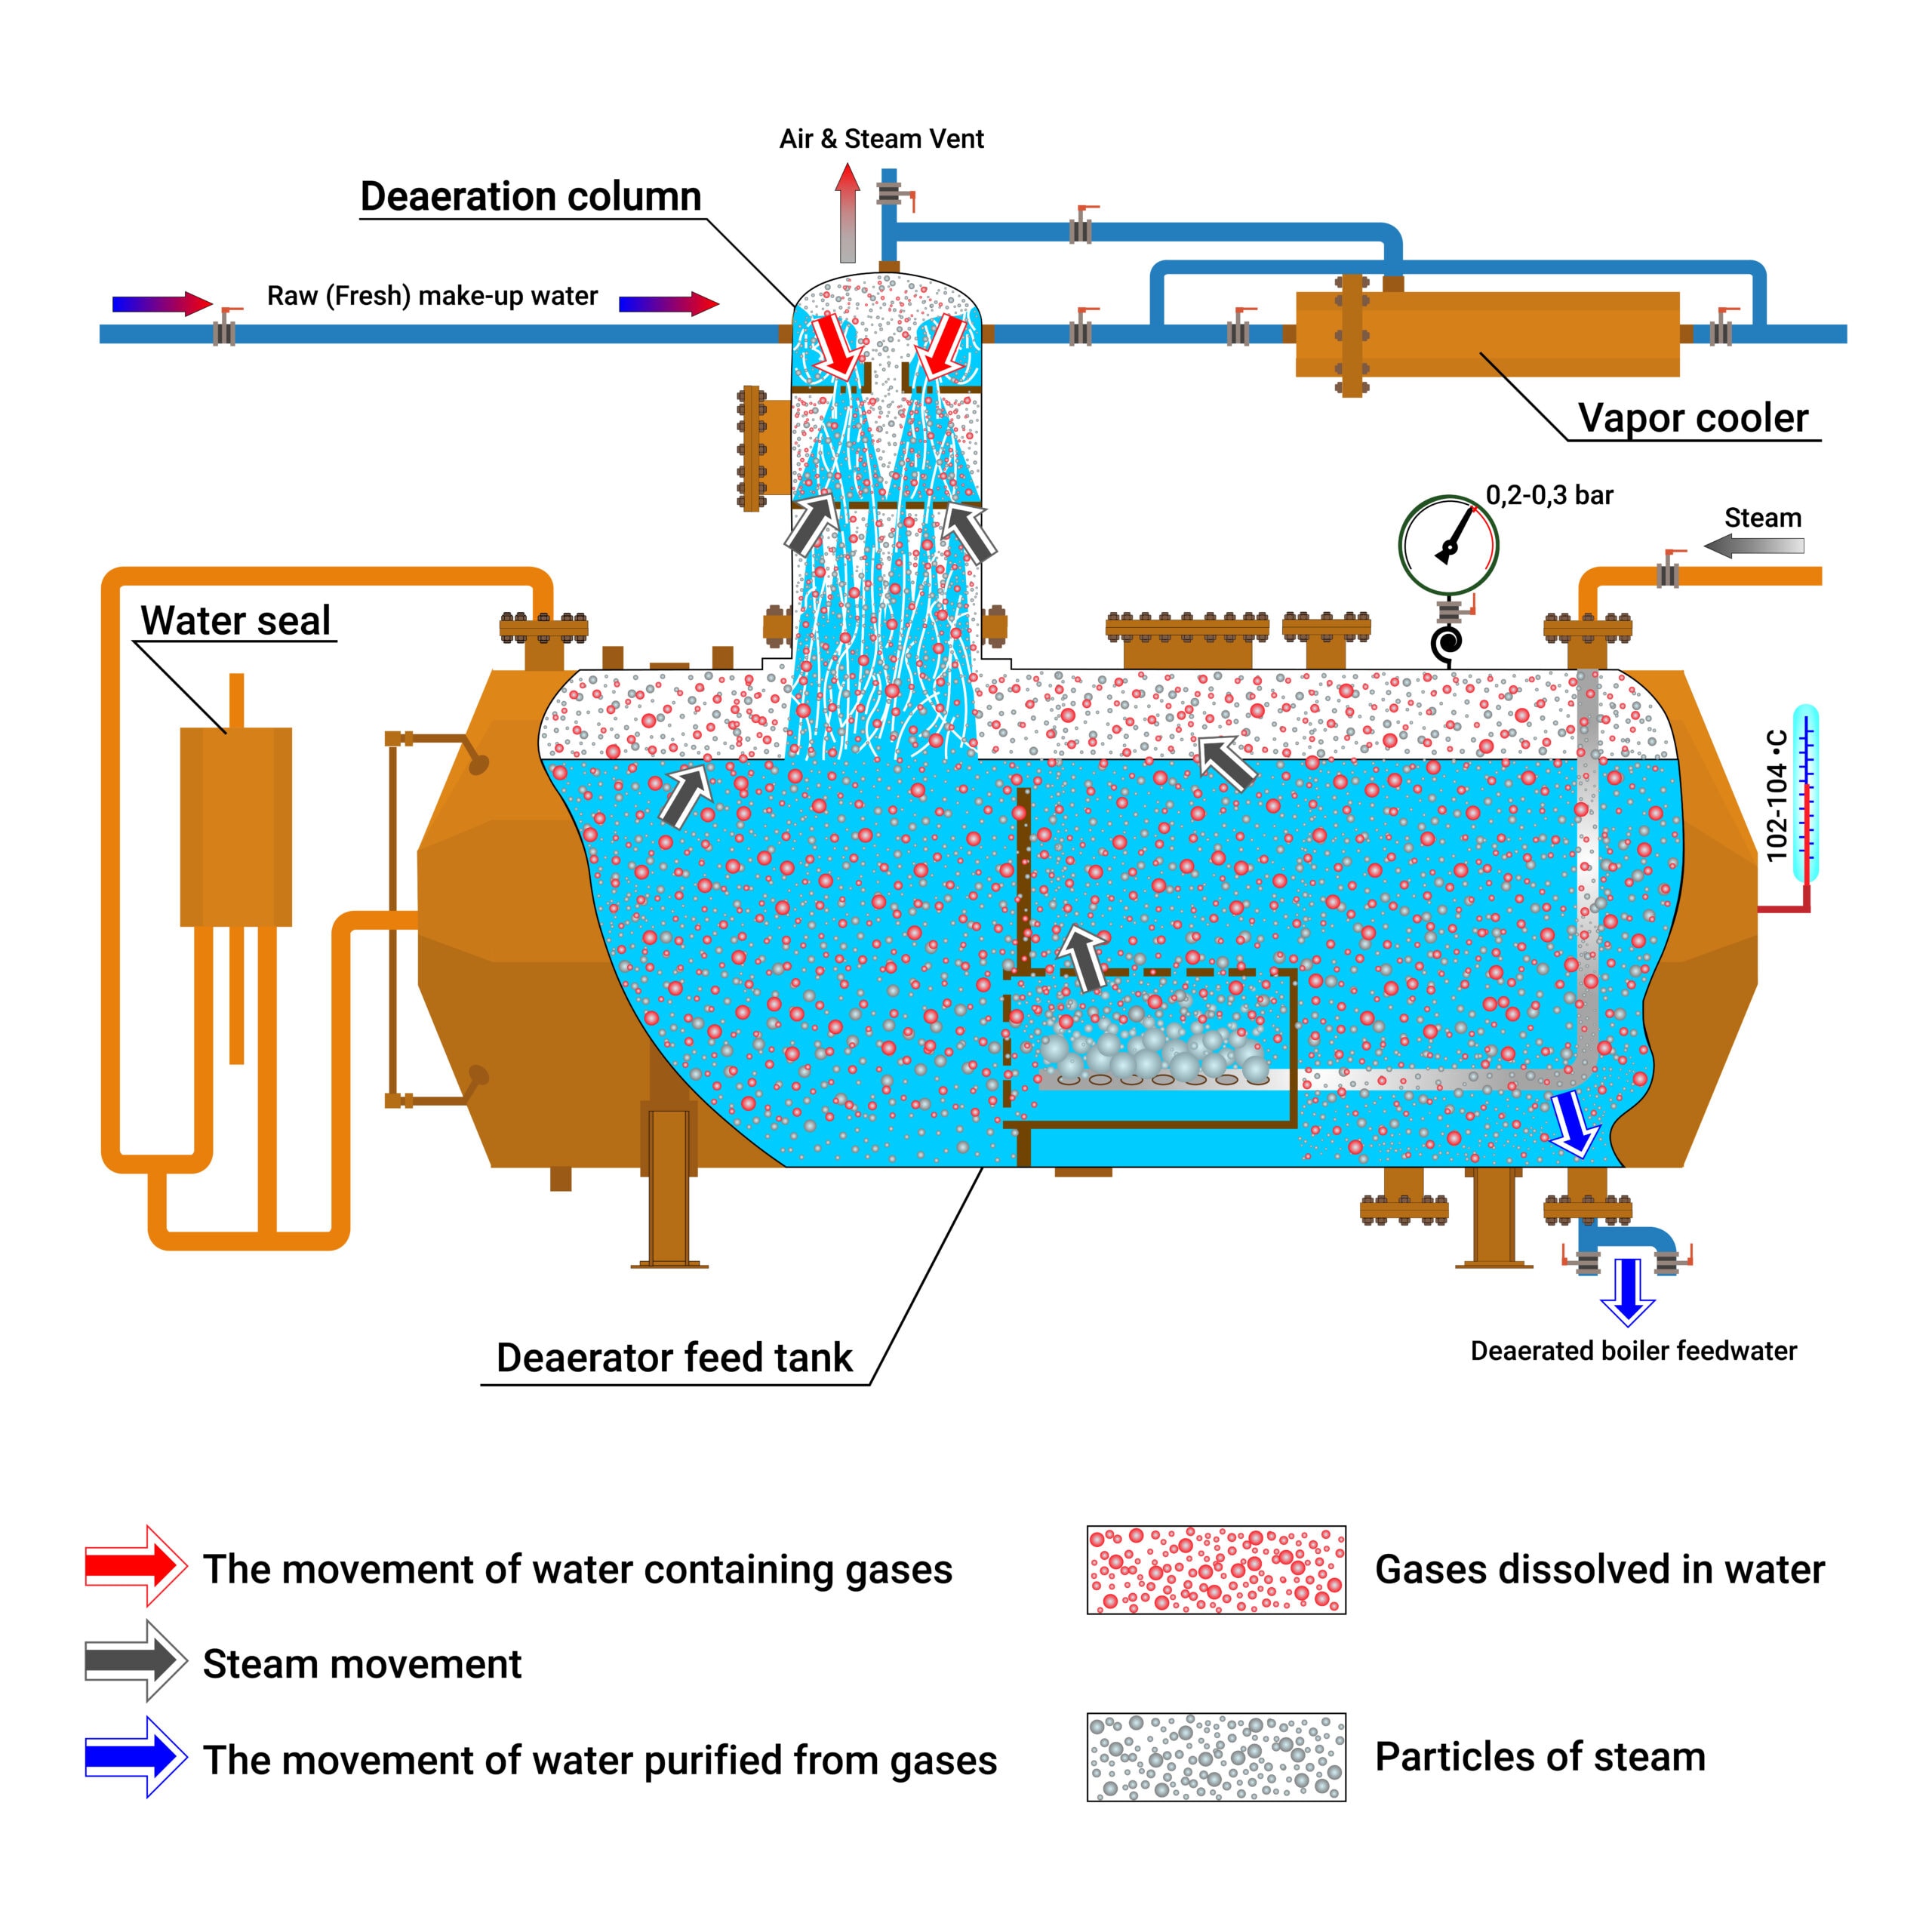 An illustrative diagram of a boiler depicting the process of treating water to make it safe for use